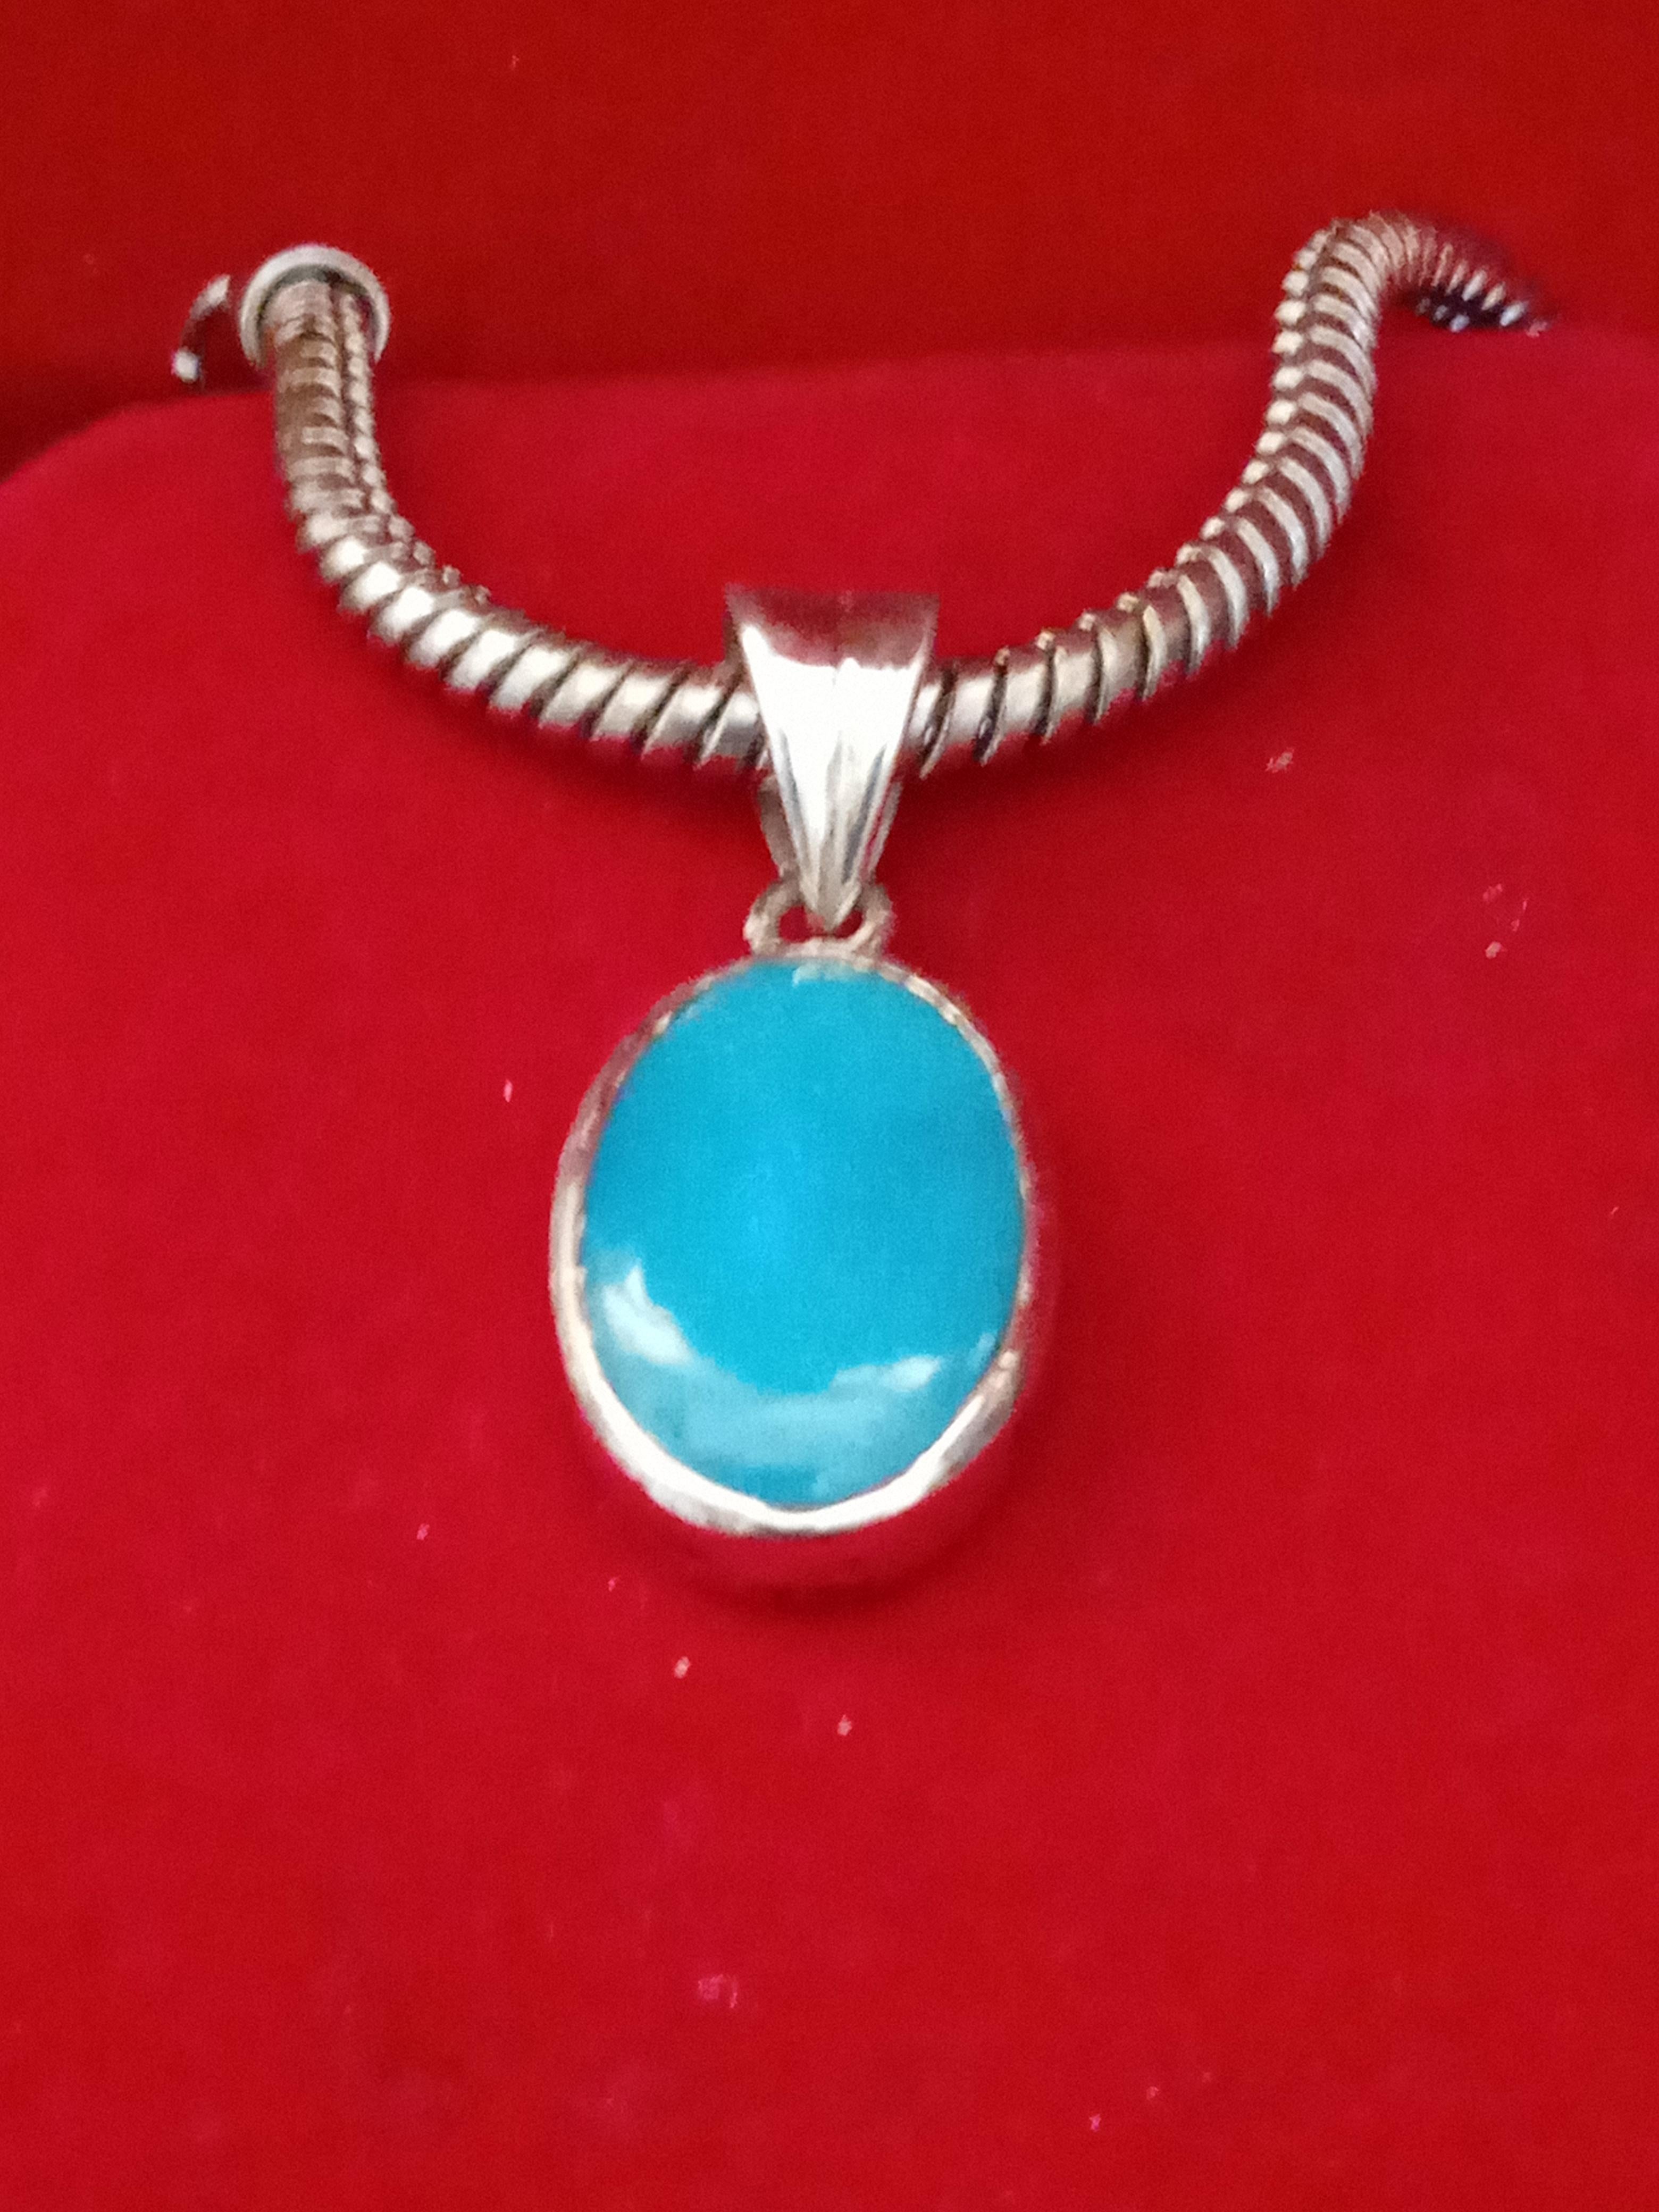 Enhance your jewellery collection with this stunning oval-shaped natural turquoise stone pendant necklace. The pendant is beautifully crafted with a hook closure, made of 925 silver and fine silver base metal. The necklace measures 30 cm in length